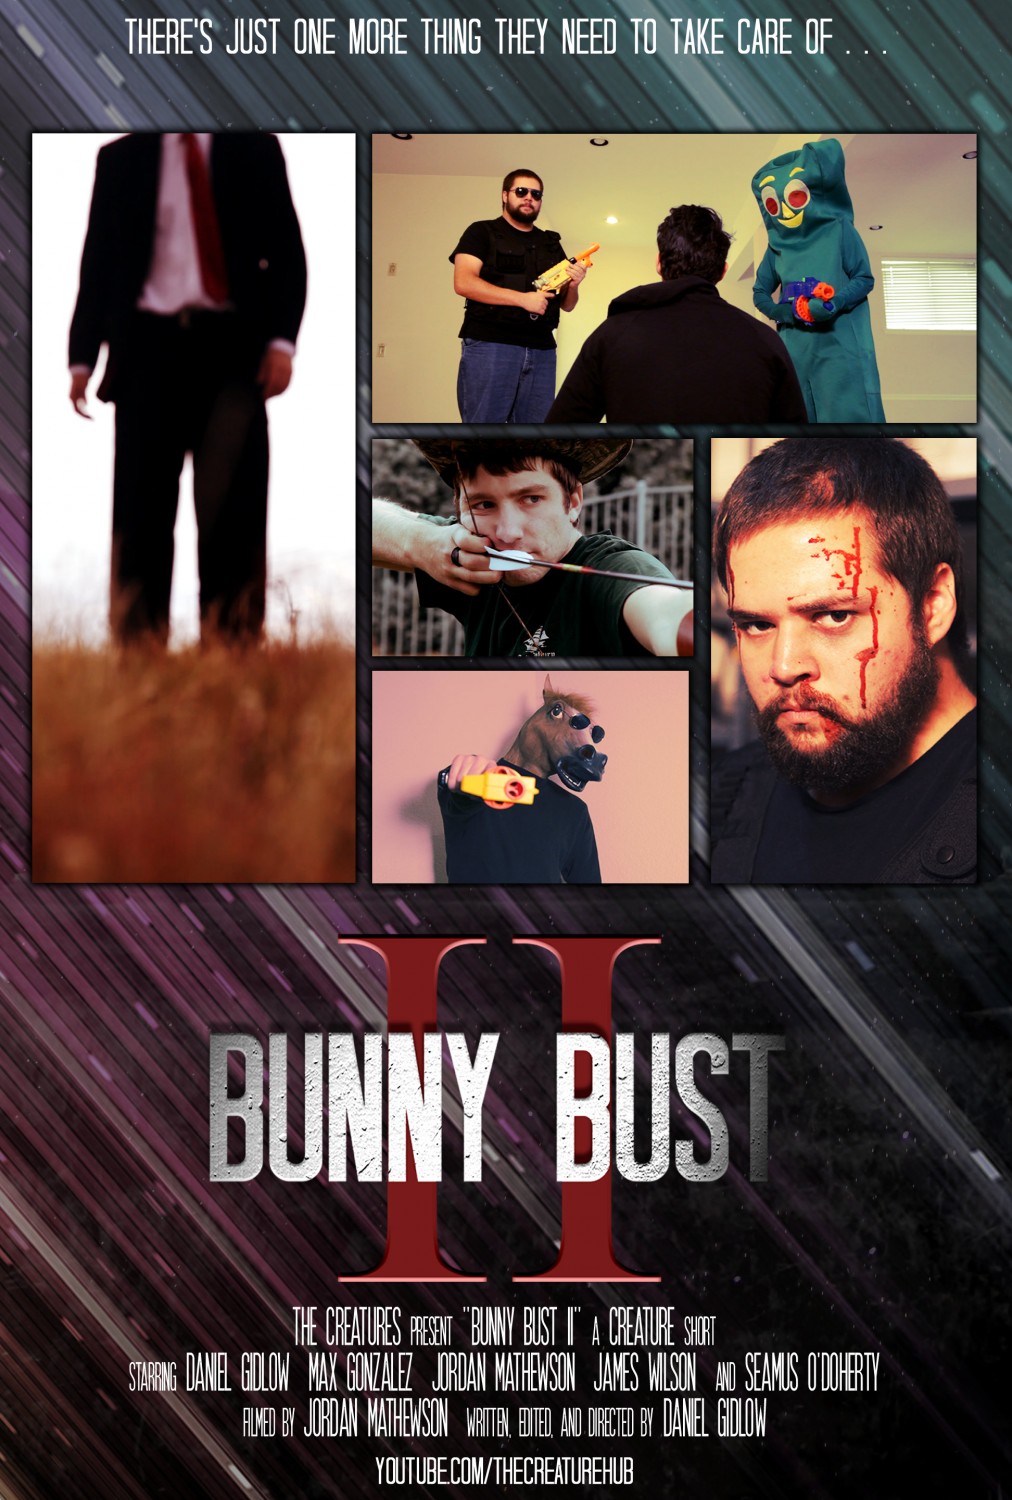 Extra Large Movie Poster Image for Bunny Bust II